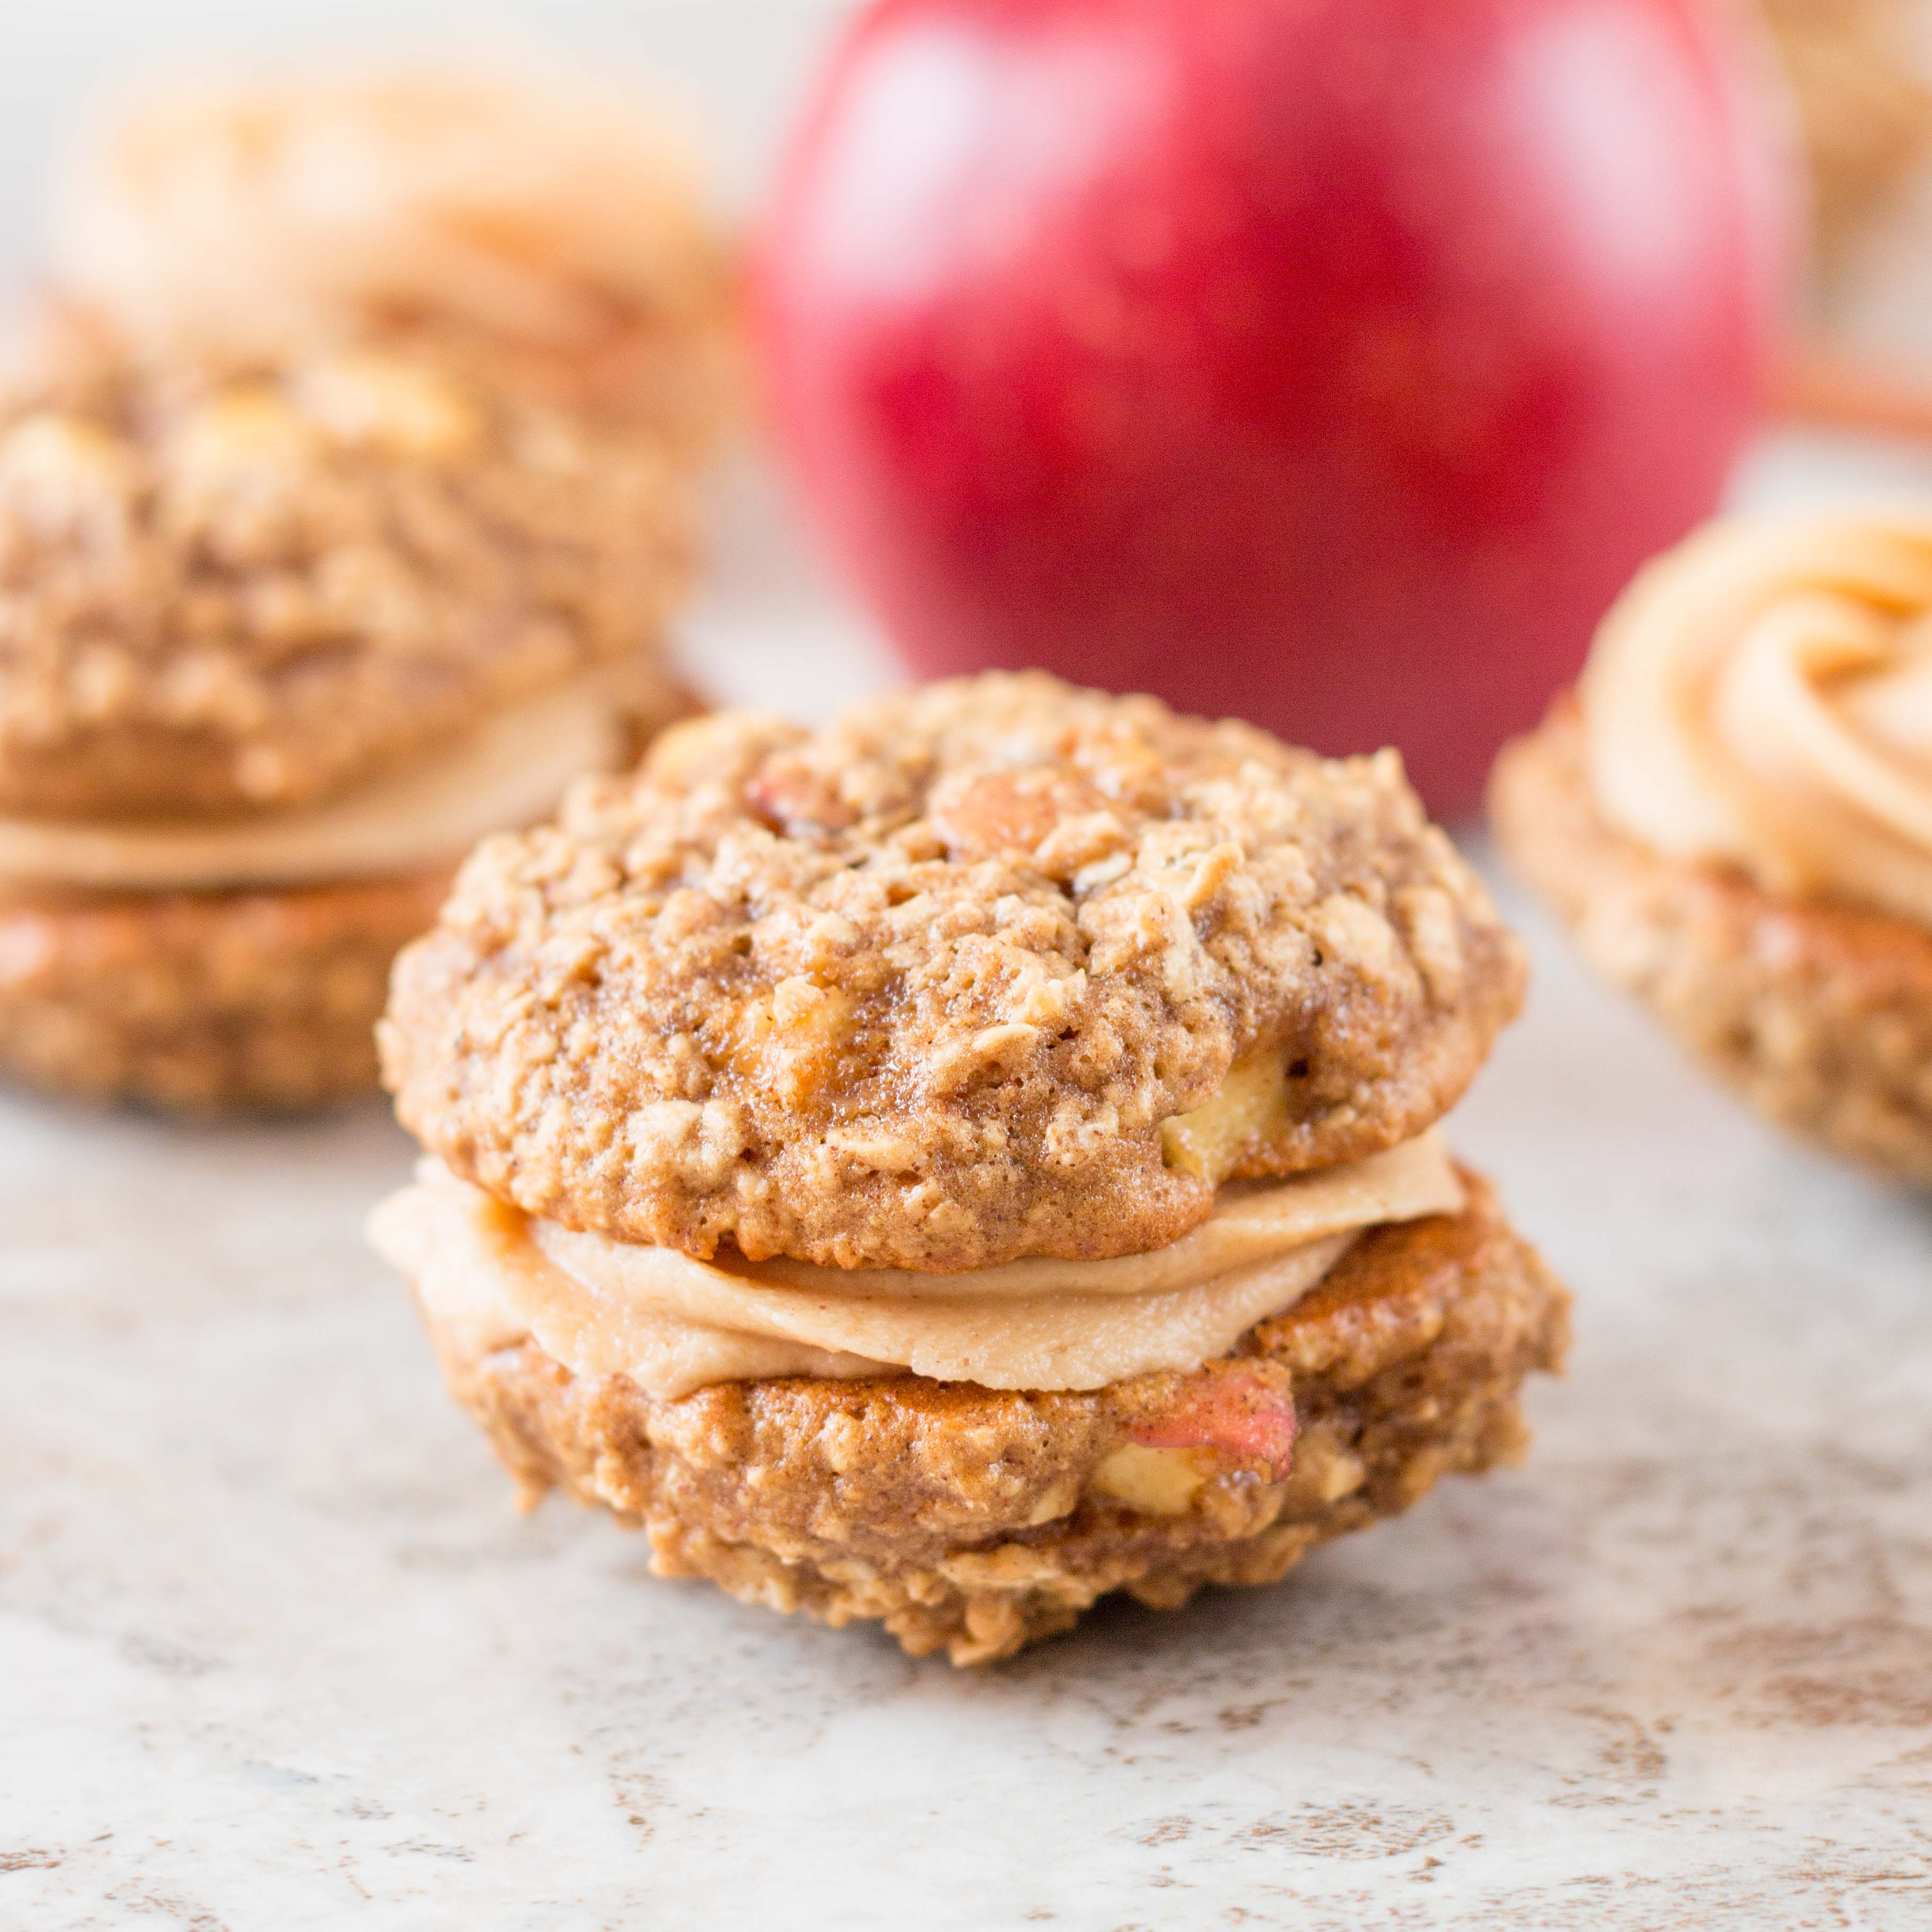 Apple Oatmeal Whoopie Pies with Peanut Butter Frosting